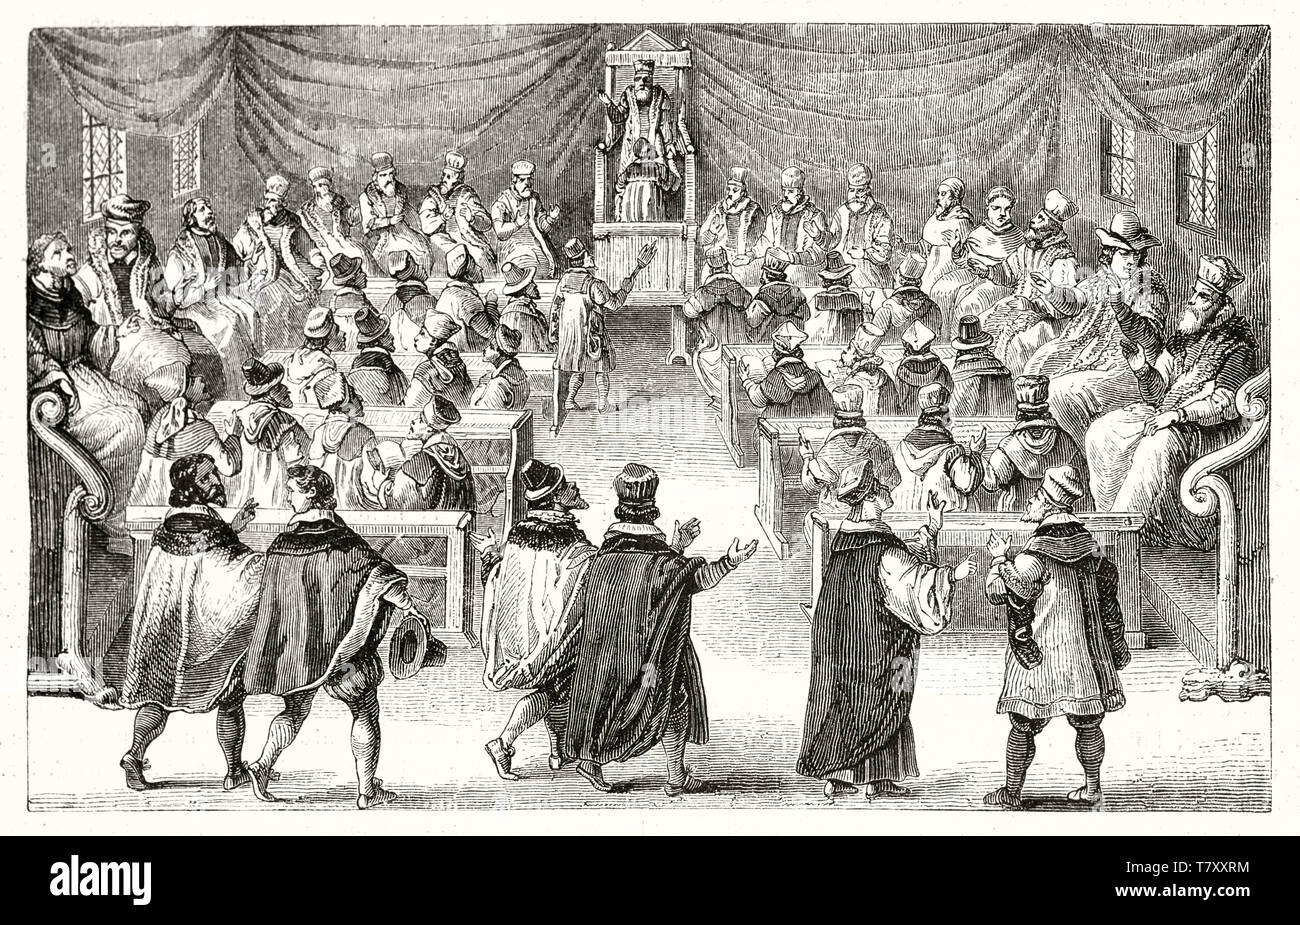 Overall view of an ancient university classroom during the ceremonial in University of Paris 17th century. After Crispin de Pas publ. on Magasin Pittoresque Paris 1848 University of Paris Stock Photo